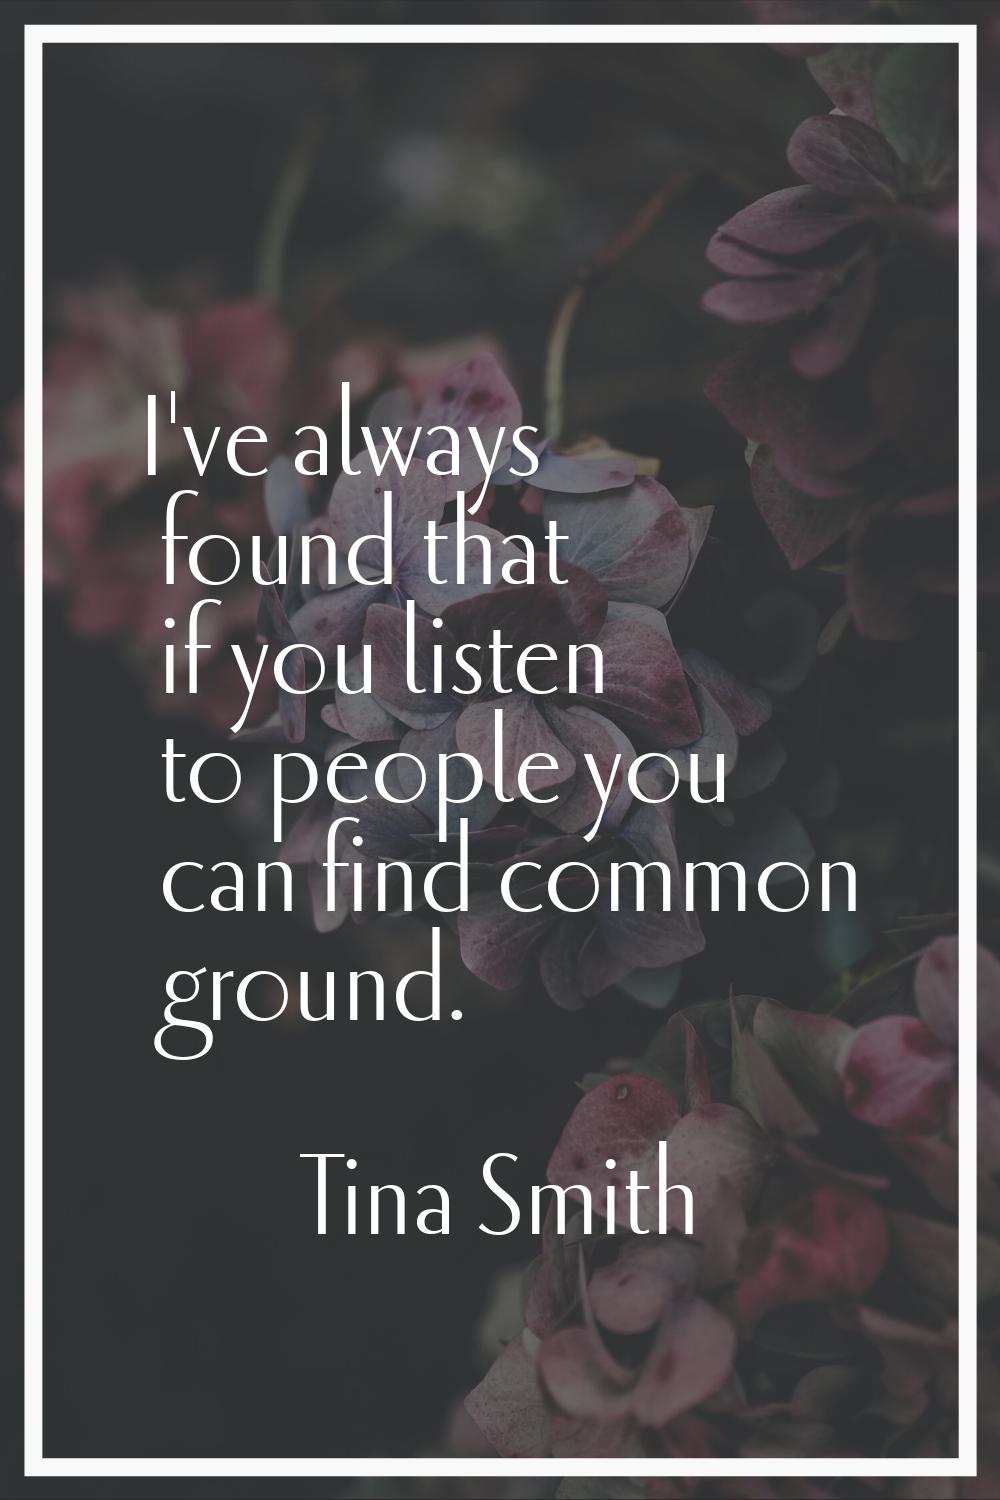 I've always found that if you listen to people you can find common ground.